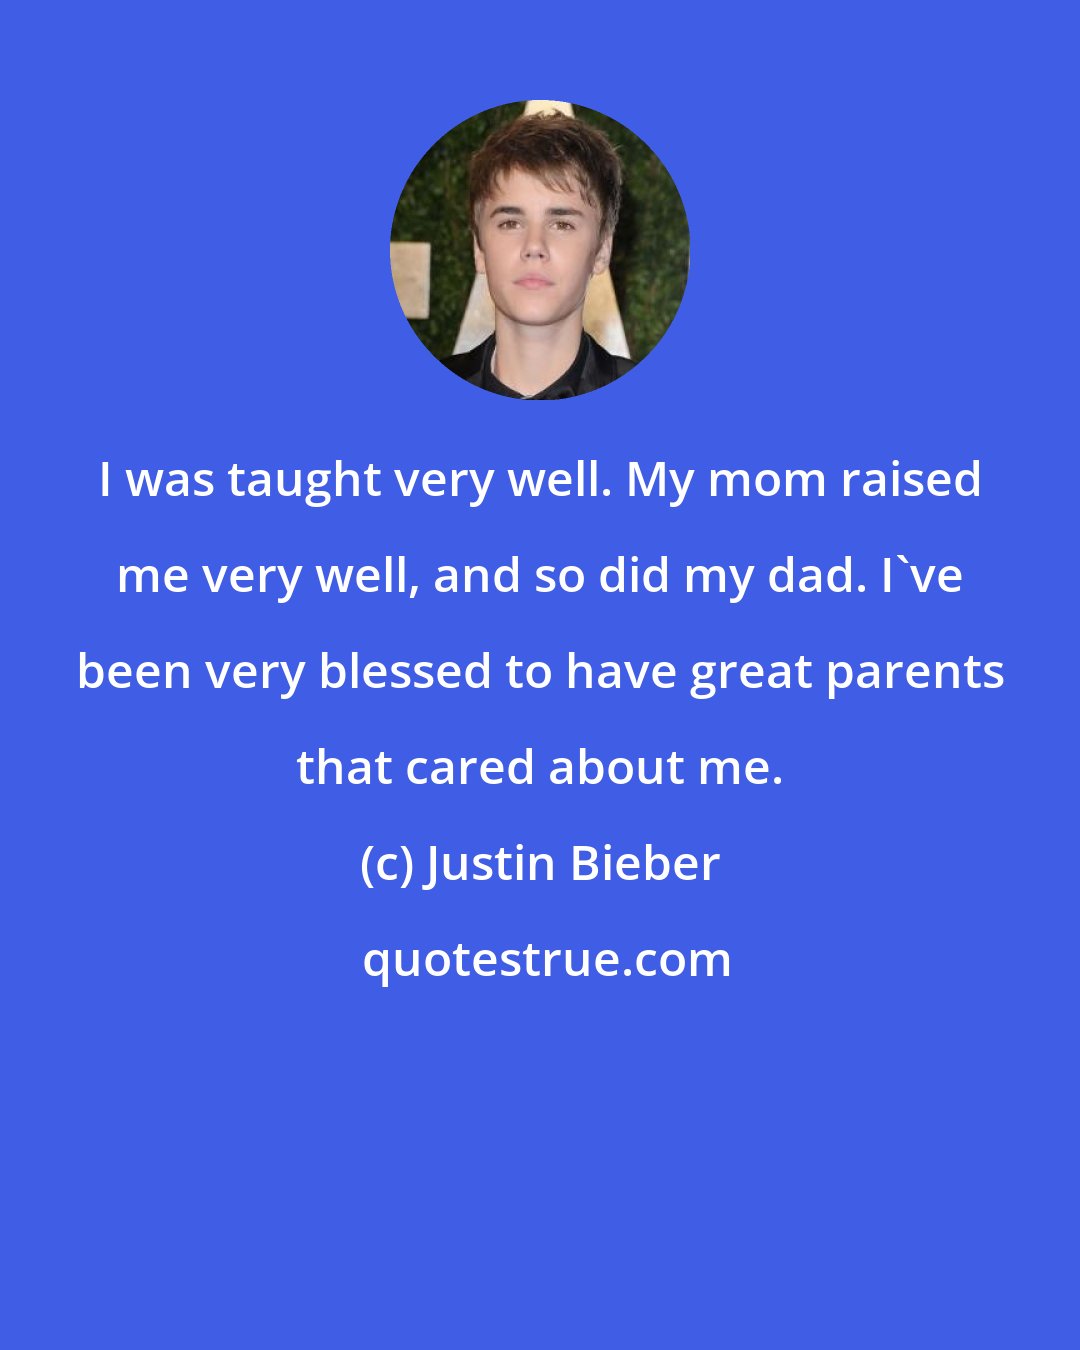 Justin Bieber: I was taught very well. My mom raised me very well, and so did my dad. I've been very blessed to have great parents that cared about me.